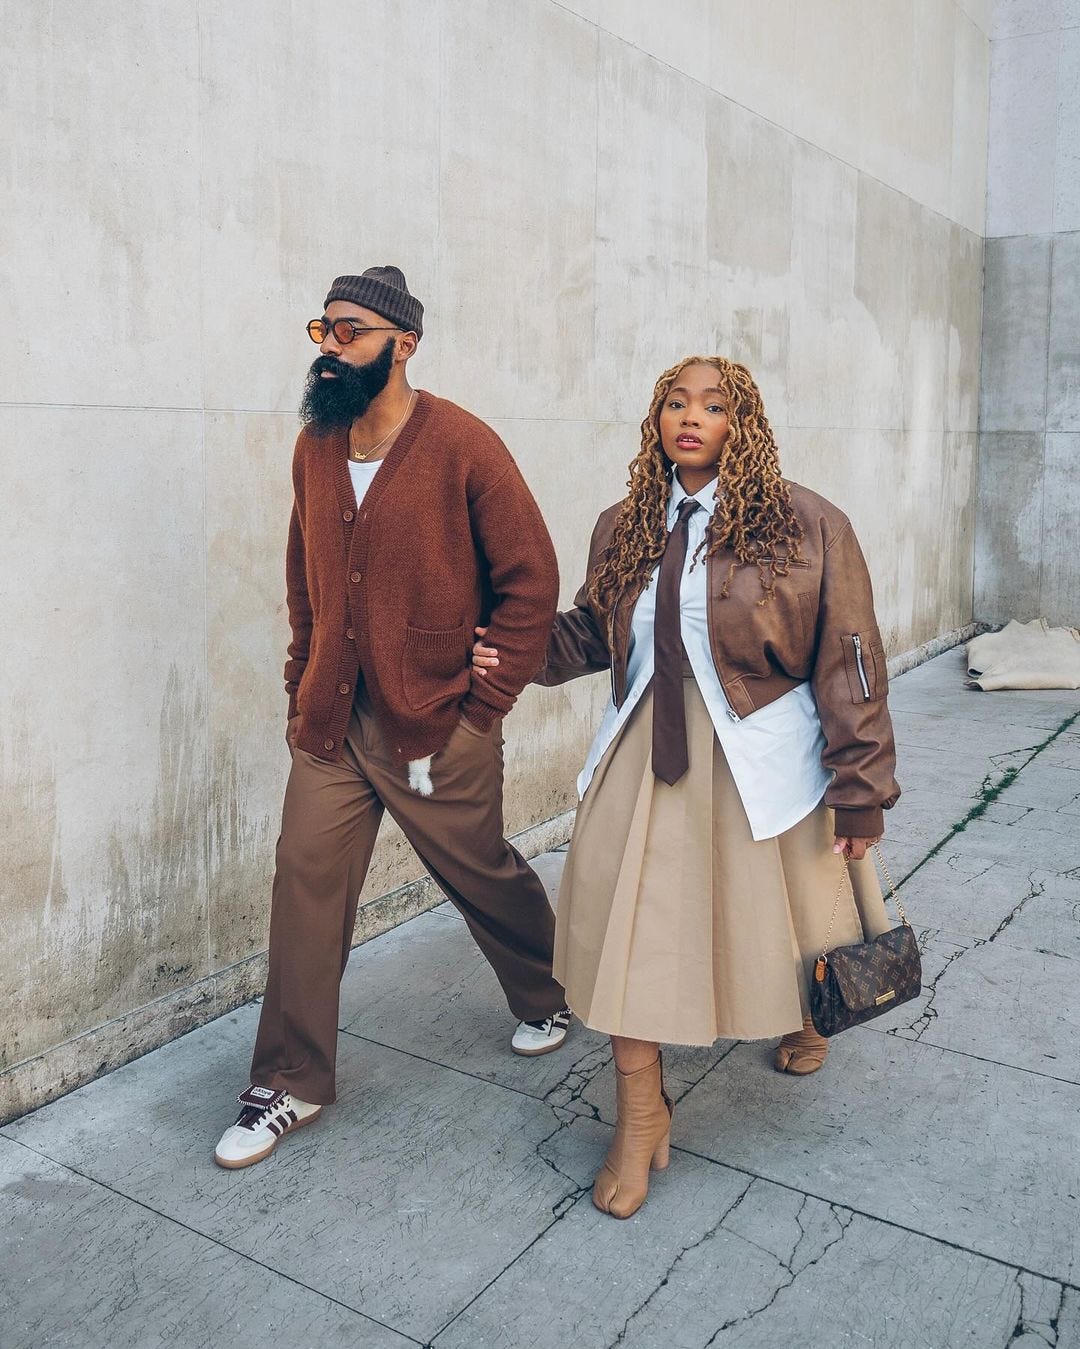 couple walking down the street wearing coordinating brown outfits. the man is in a brown cardigan and brown pants, while the woman is wearing a satin brown jacket and khaki-colored long skirt